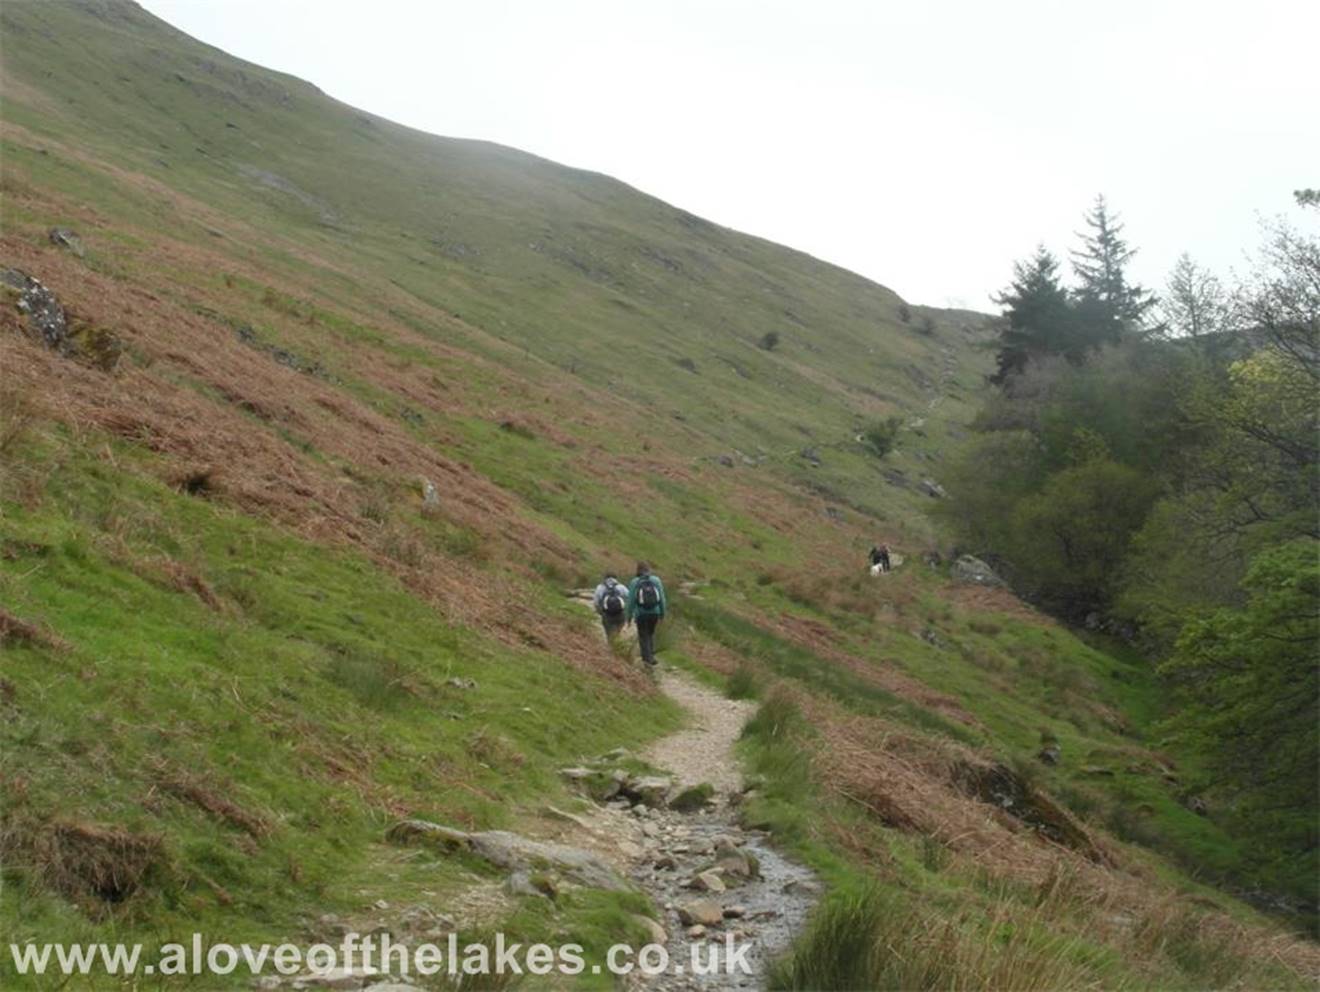 The start of the track that leads up to Boredale Hause